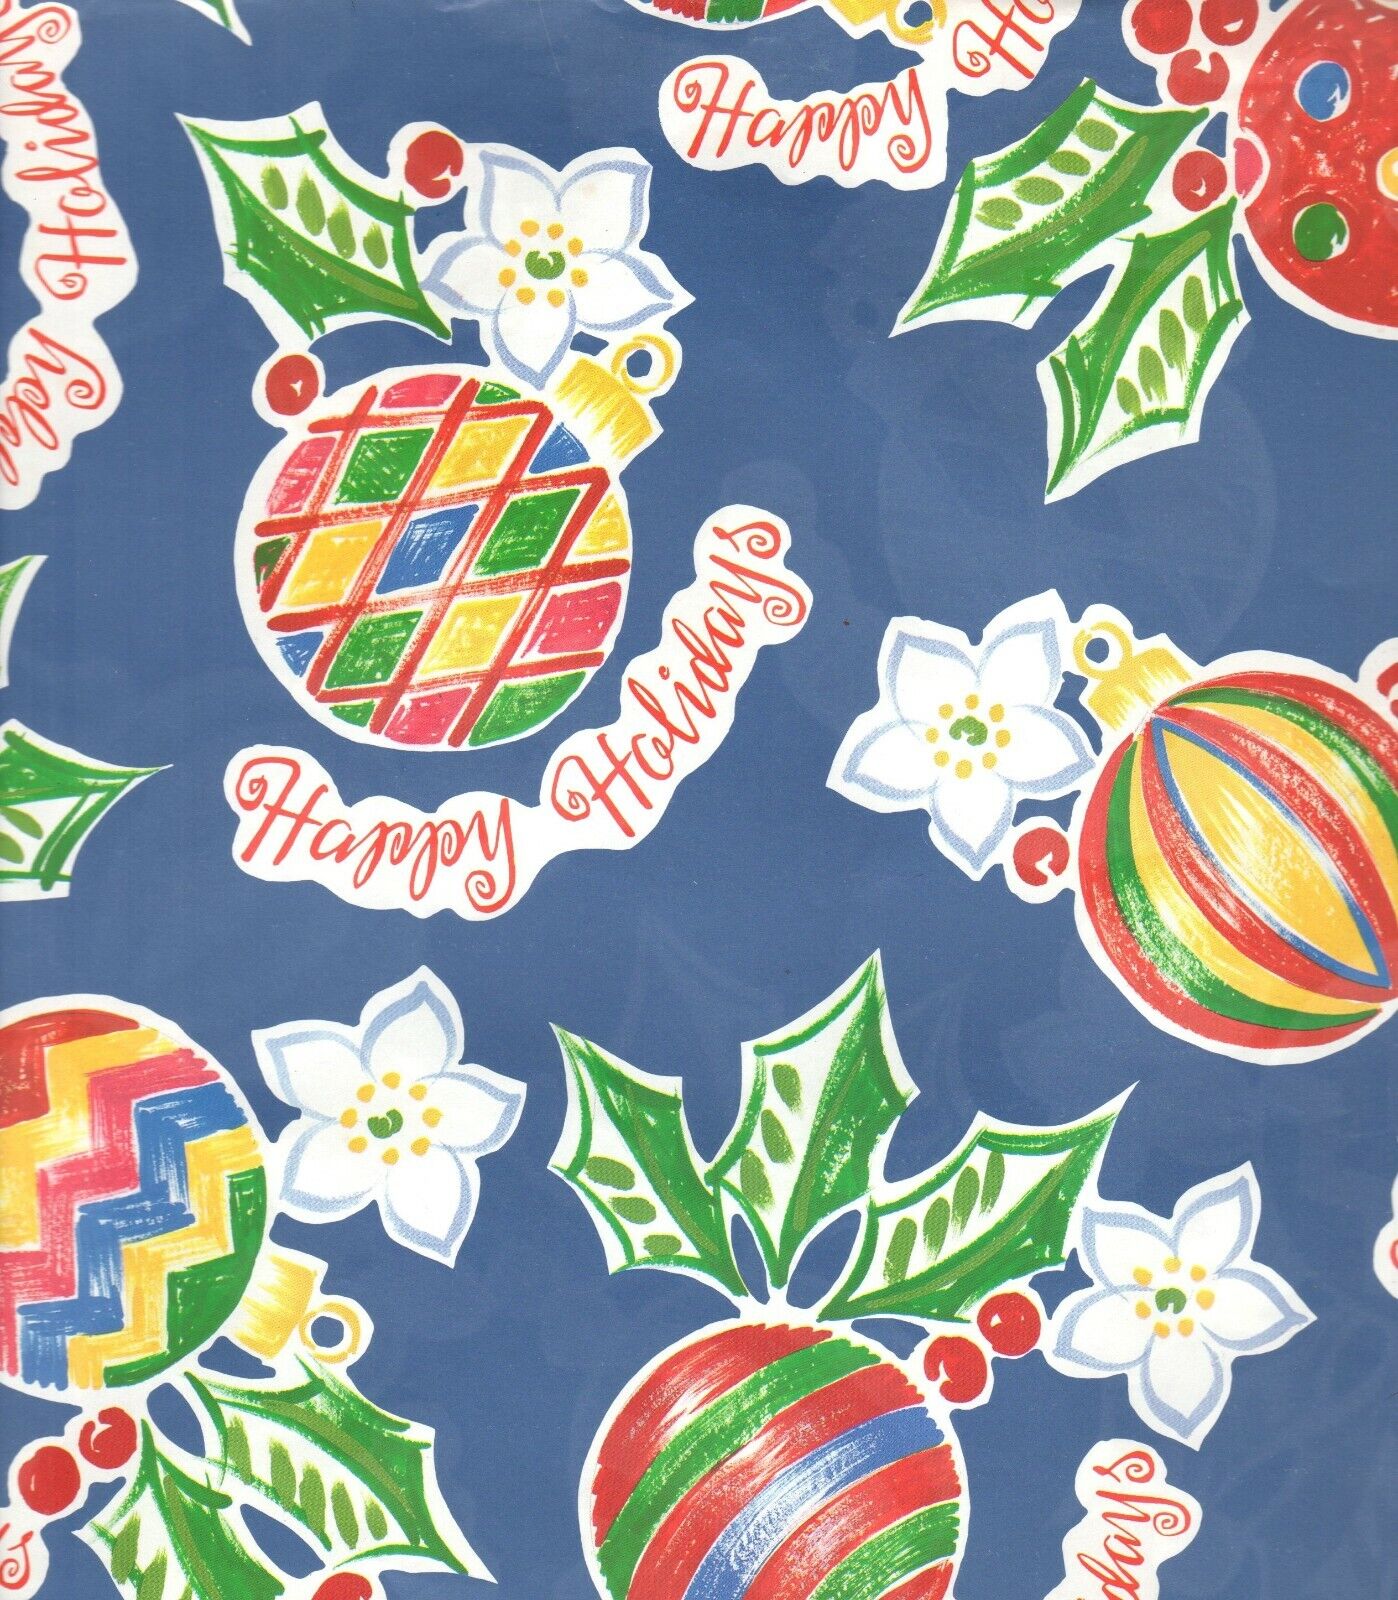 Avon Festive Holiday Gift Wrap Christmas Wrapping Paper Blue White Flowers Holly